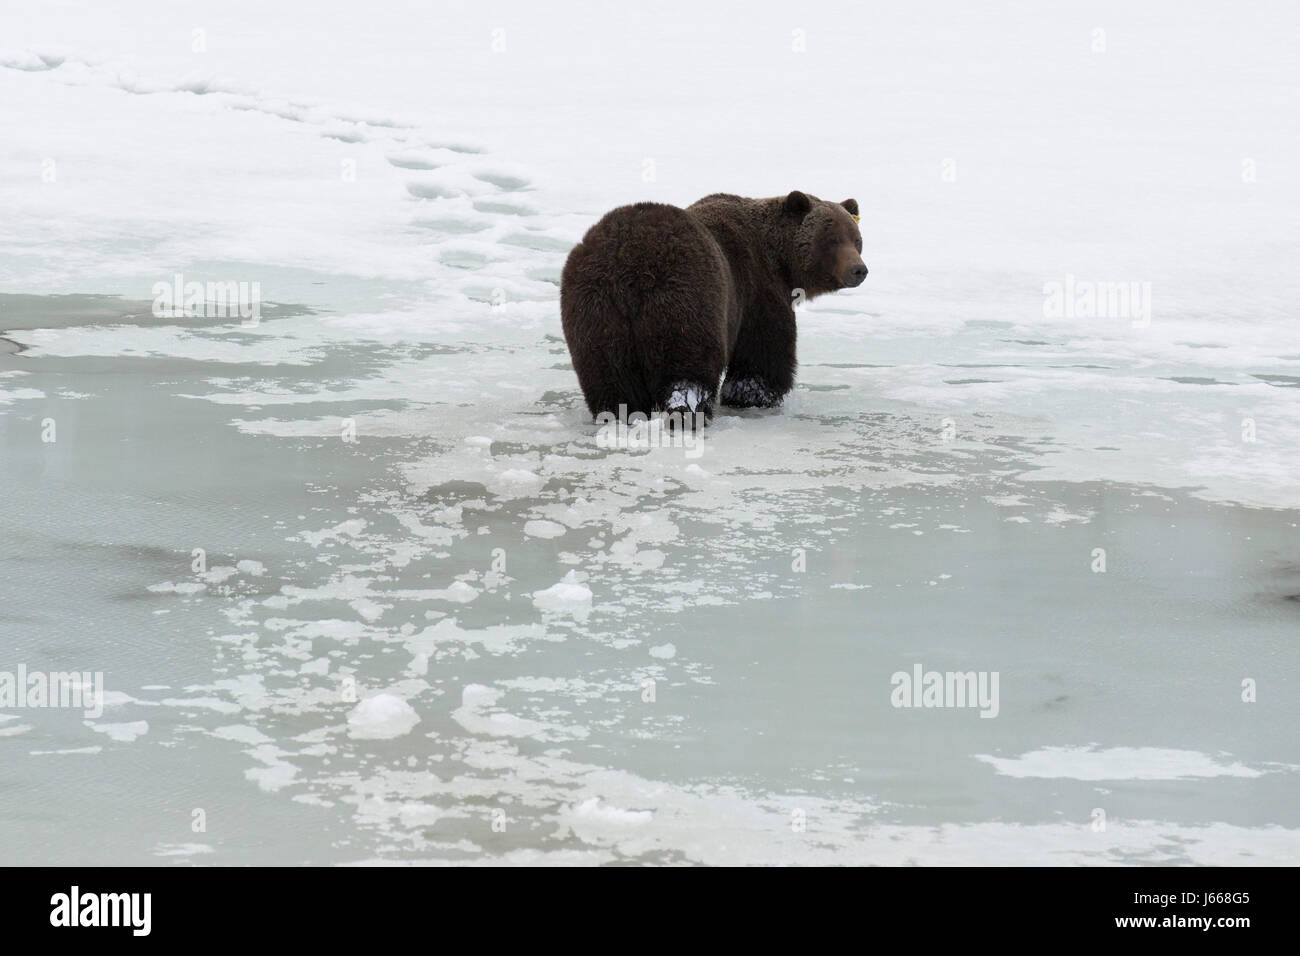 Grizzly bear (Ursus arctos horribilis) crossing a semi-frozen lake in Alberta, Canada. The bear has just emerged from hibernation. Stock Photo